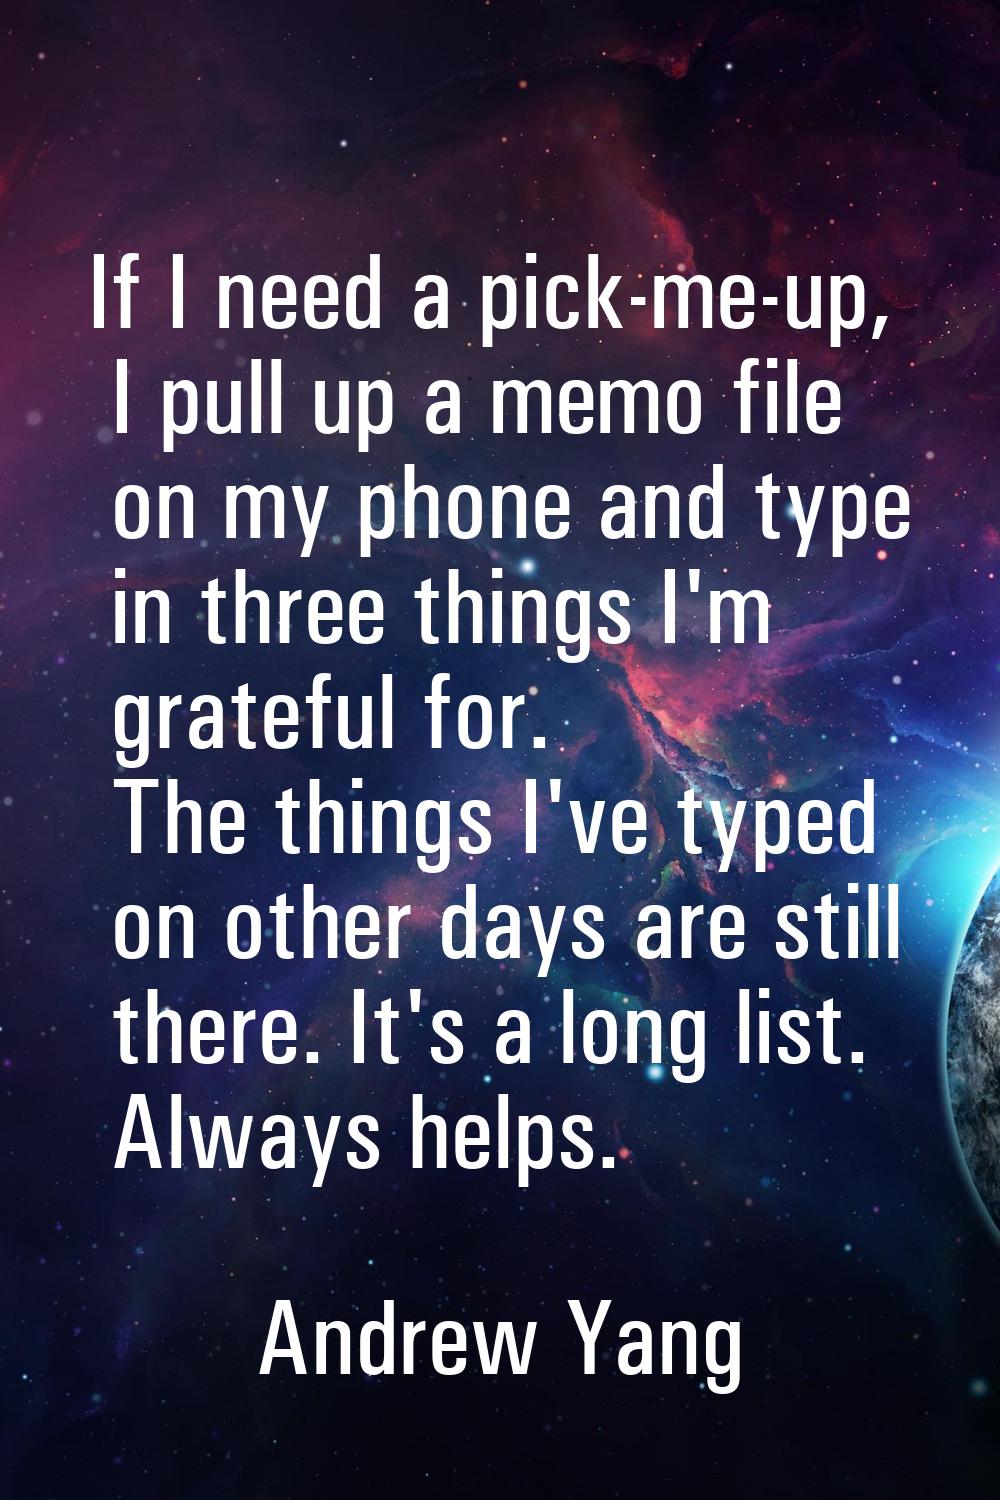 If I need a pick-me-up, I pull up a memo file on my phone and type in three things I'm grateful for